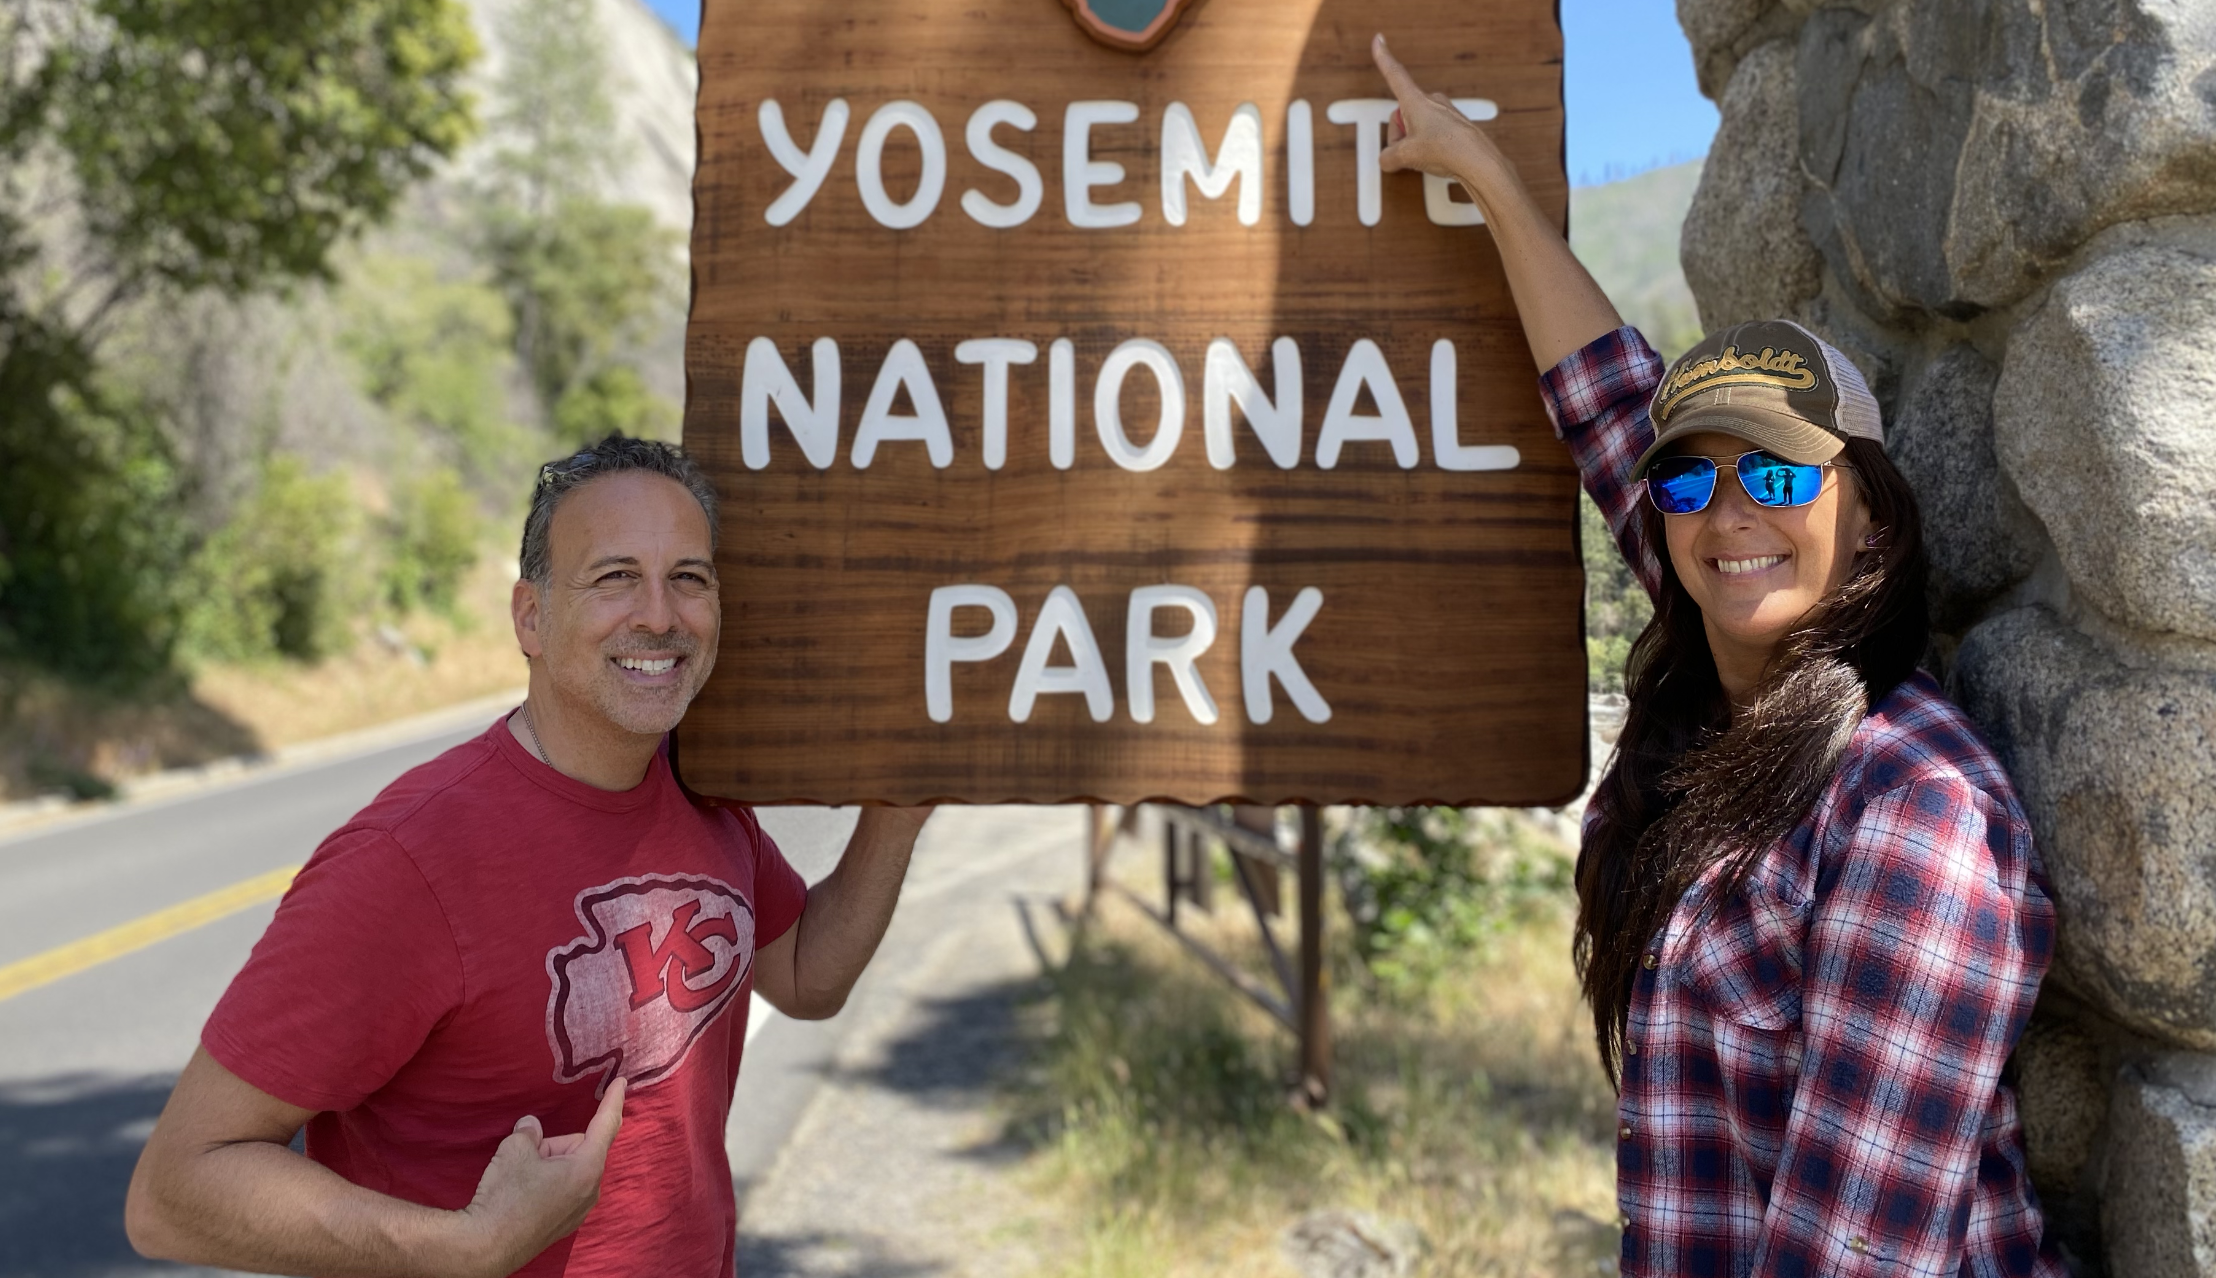 At Yosemite, doing our thing.